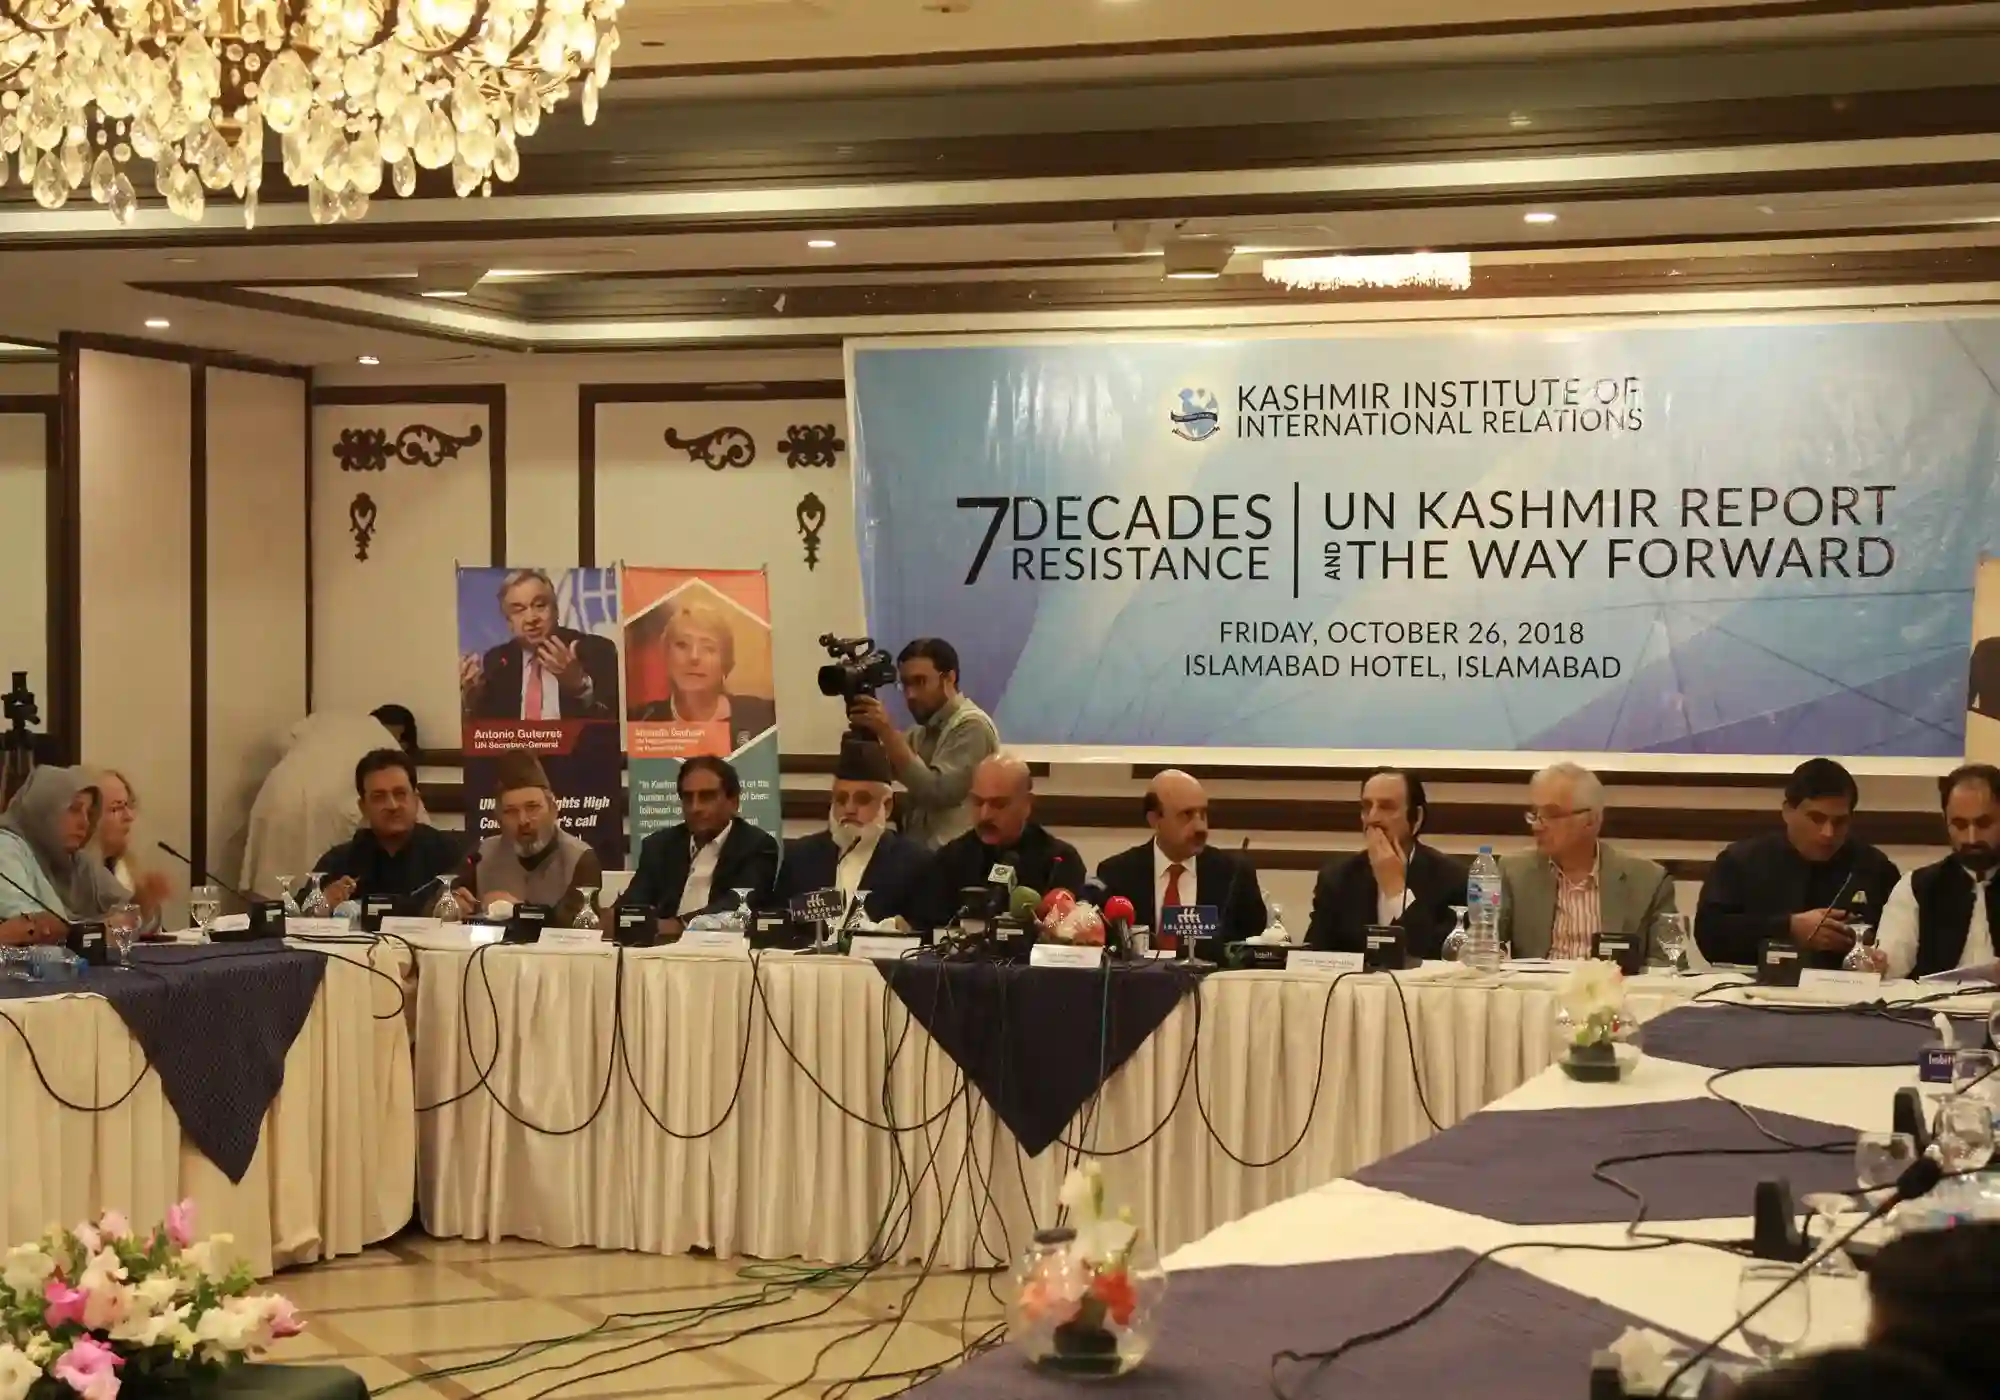 7 DECADES RESISTANCE; UN KASHMIR REPORT AND THE WAY FORWARD